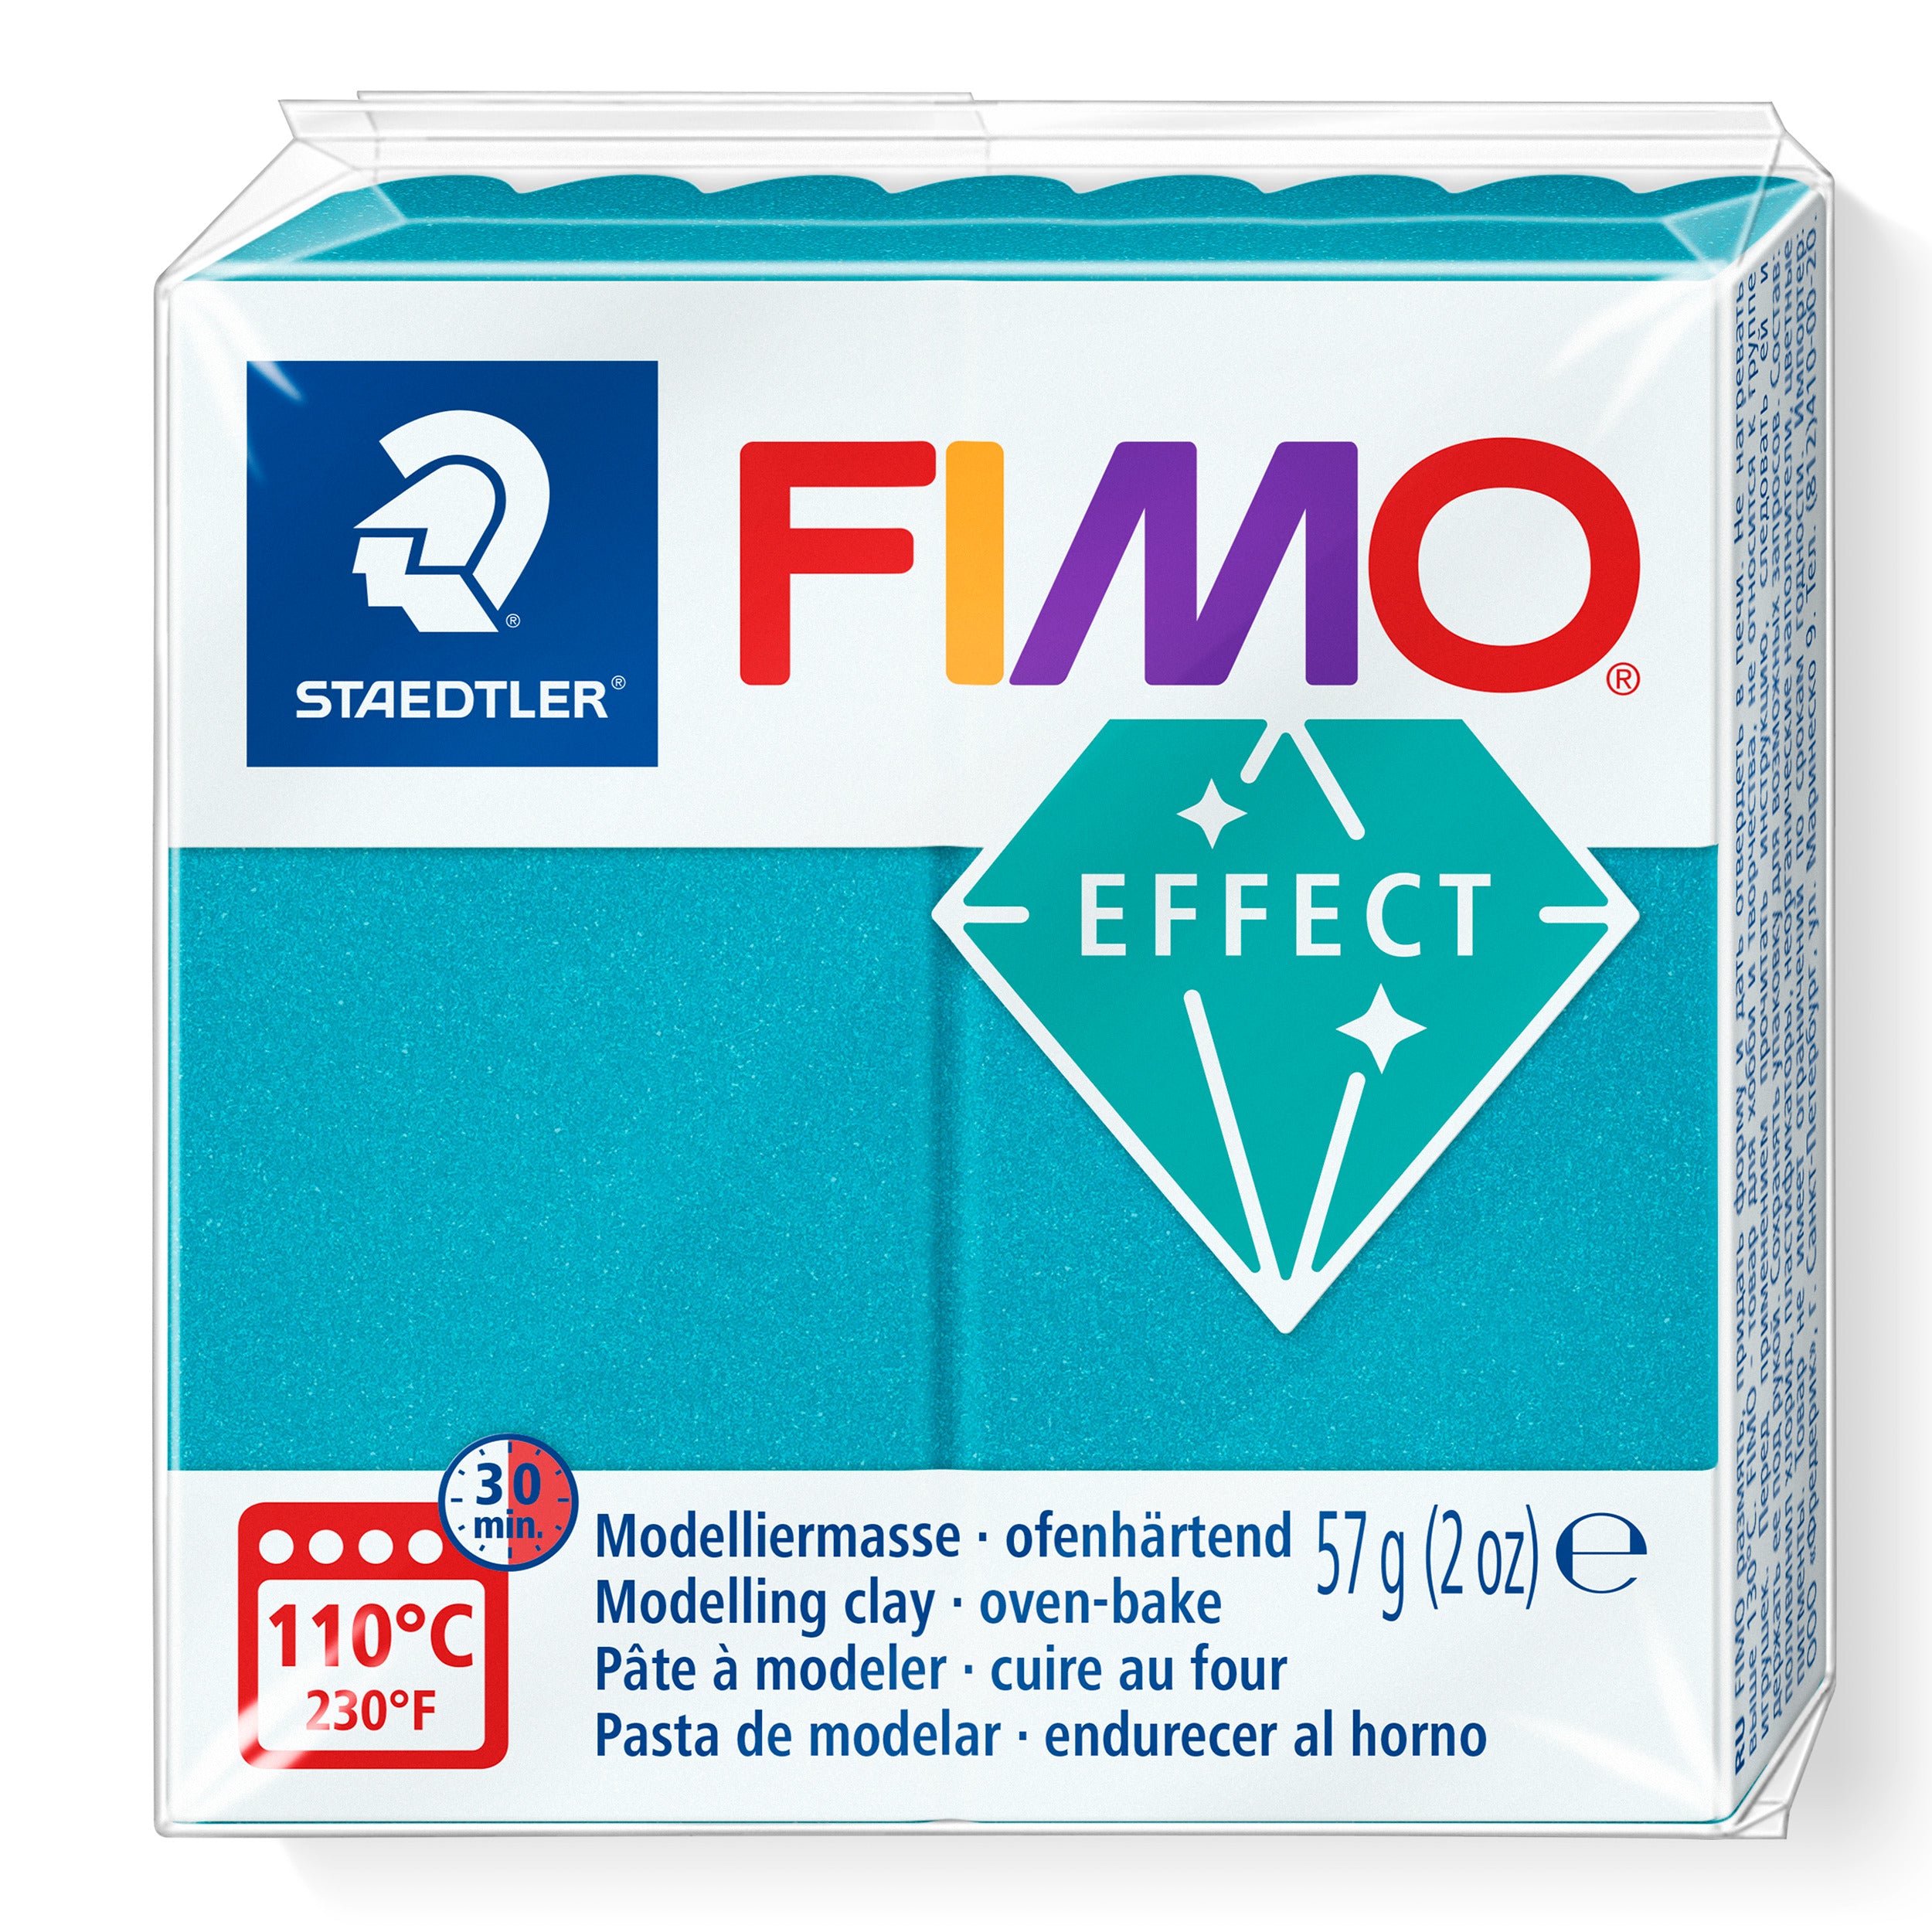 NEW Metallic Turquoise FIMO Effect polymer Clay 57g 8010-36